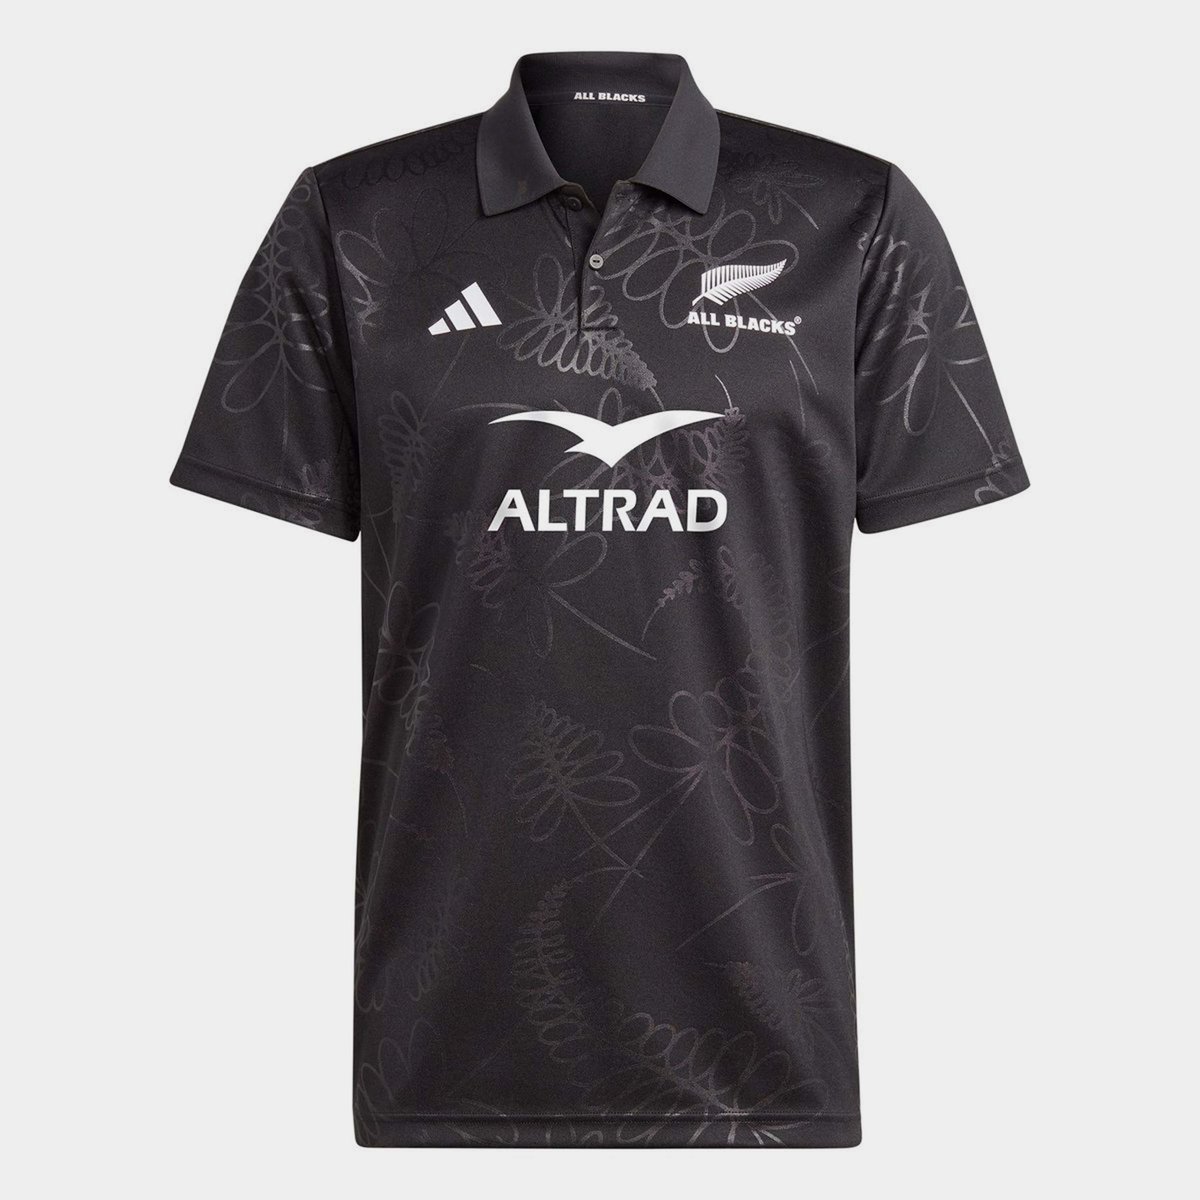 Official All Blacks Rugby Shirts & Jerseys - Lovell Rugby